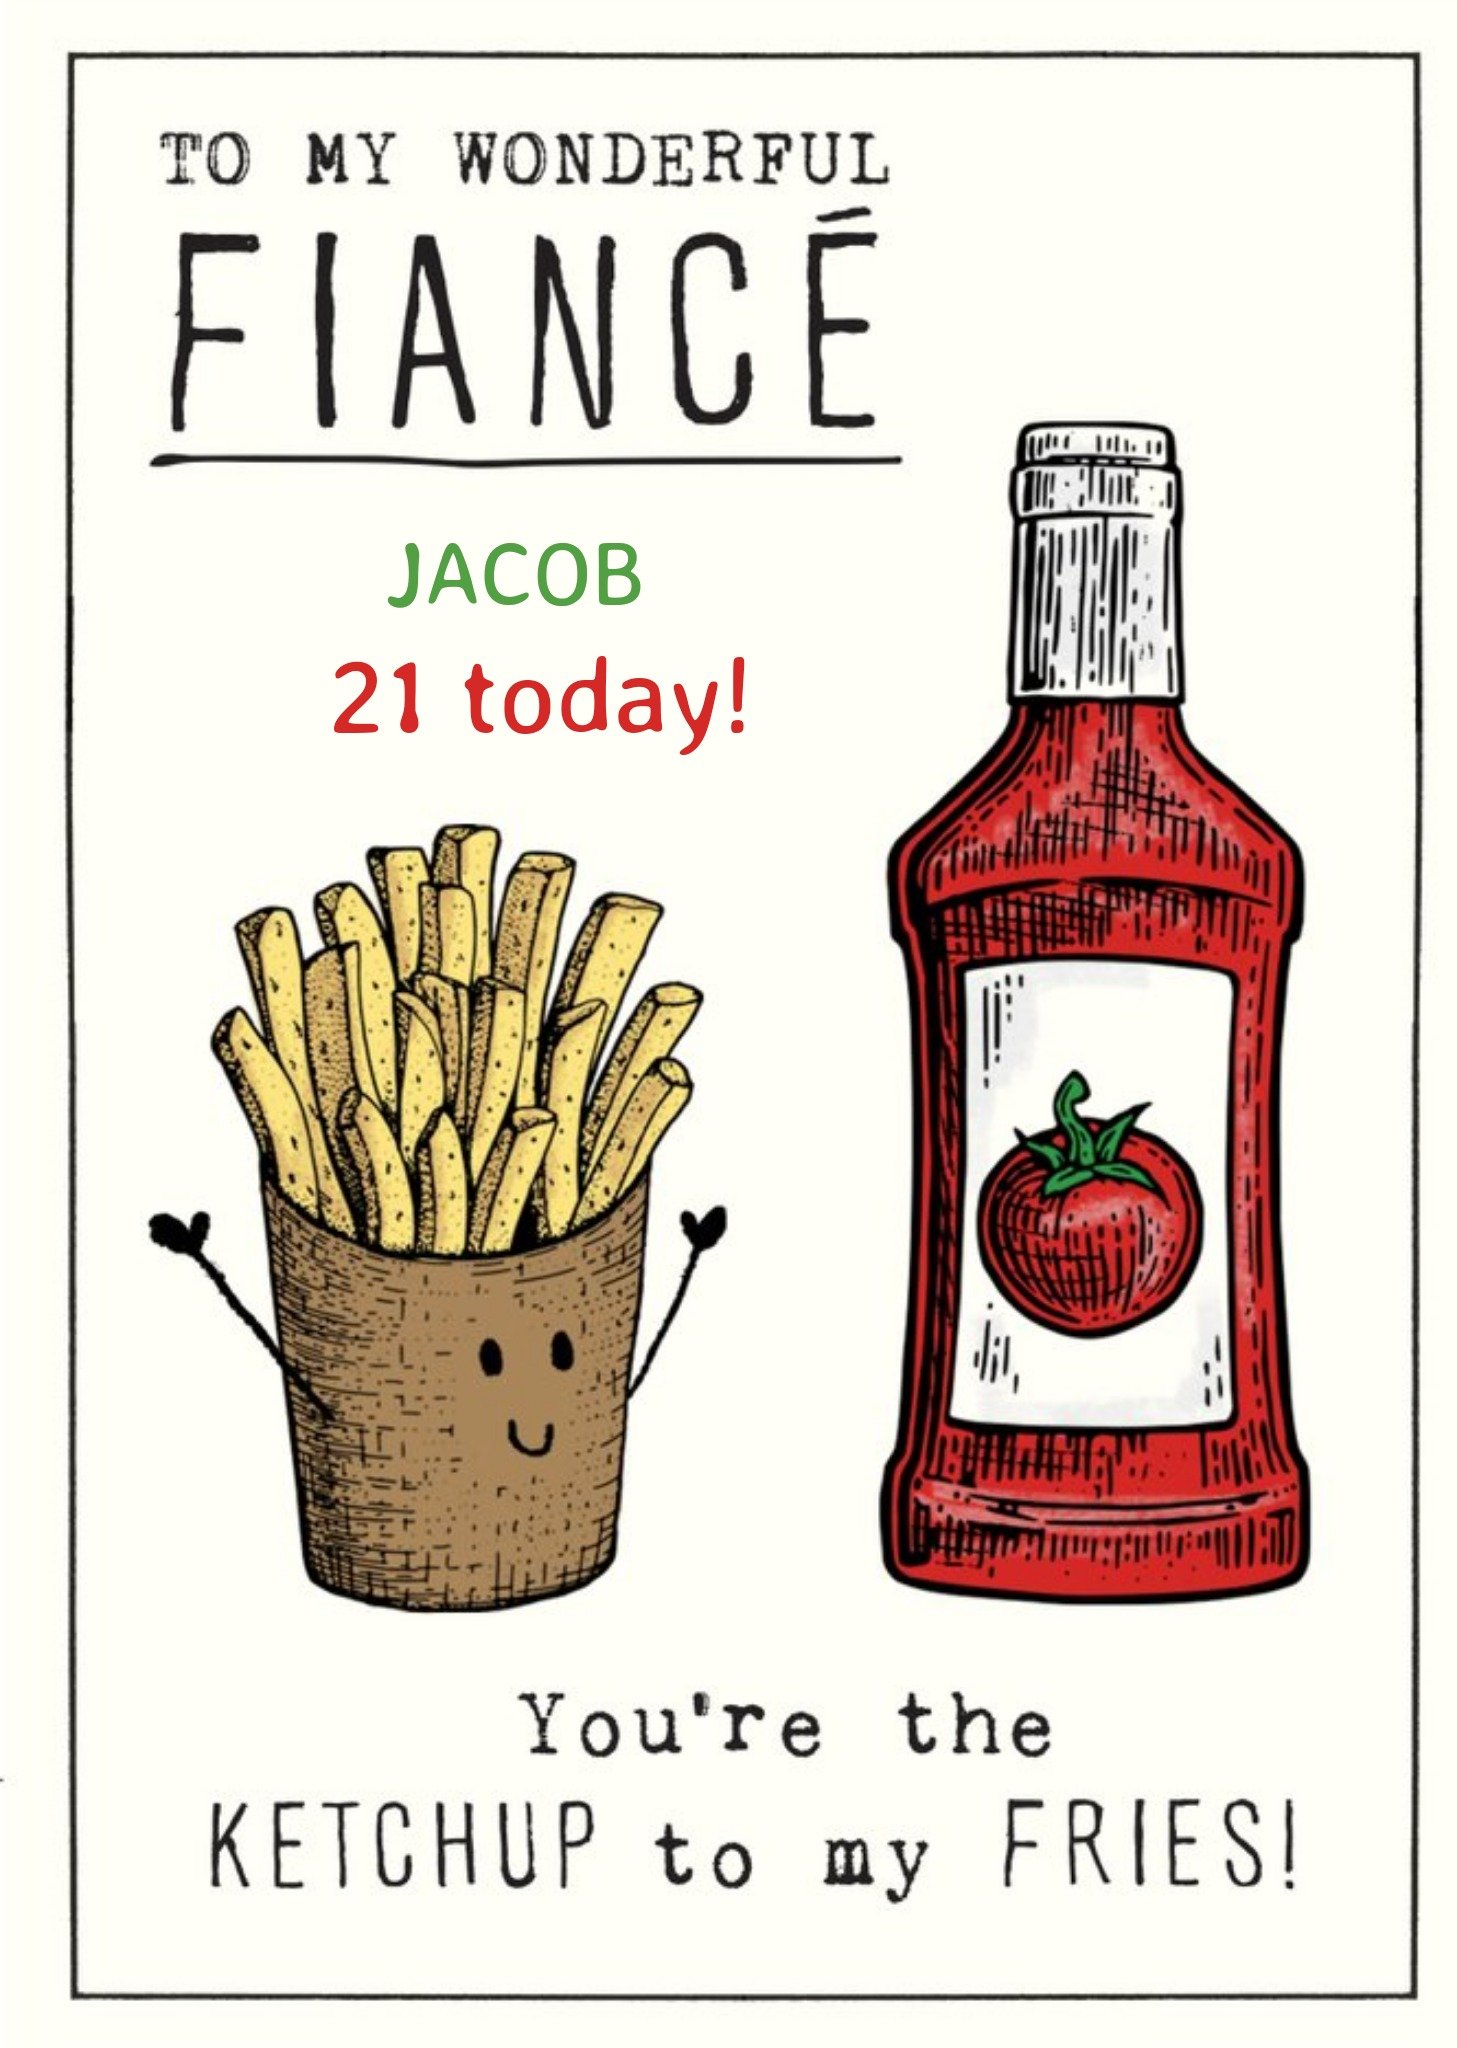 Moonpig Funny Illustrative Ketchup To My Fries Fiance Birthday Card, Large